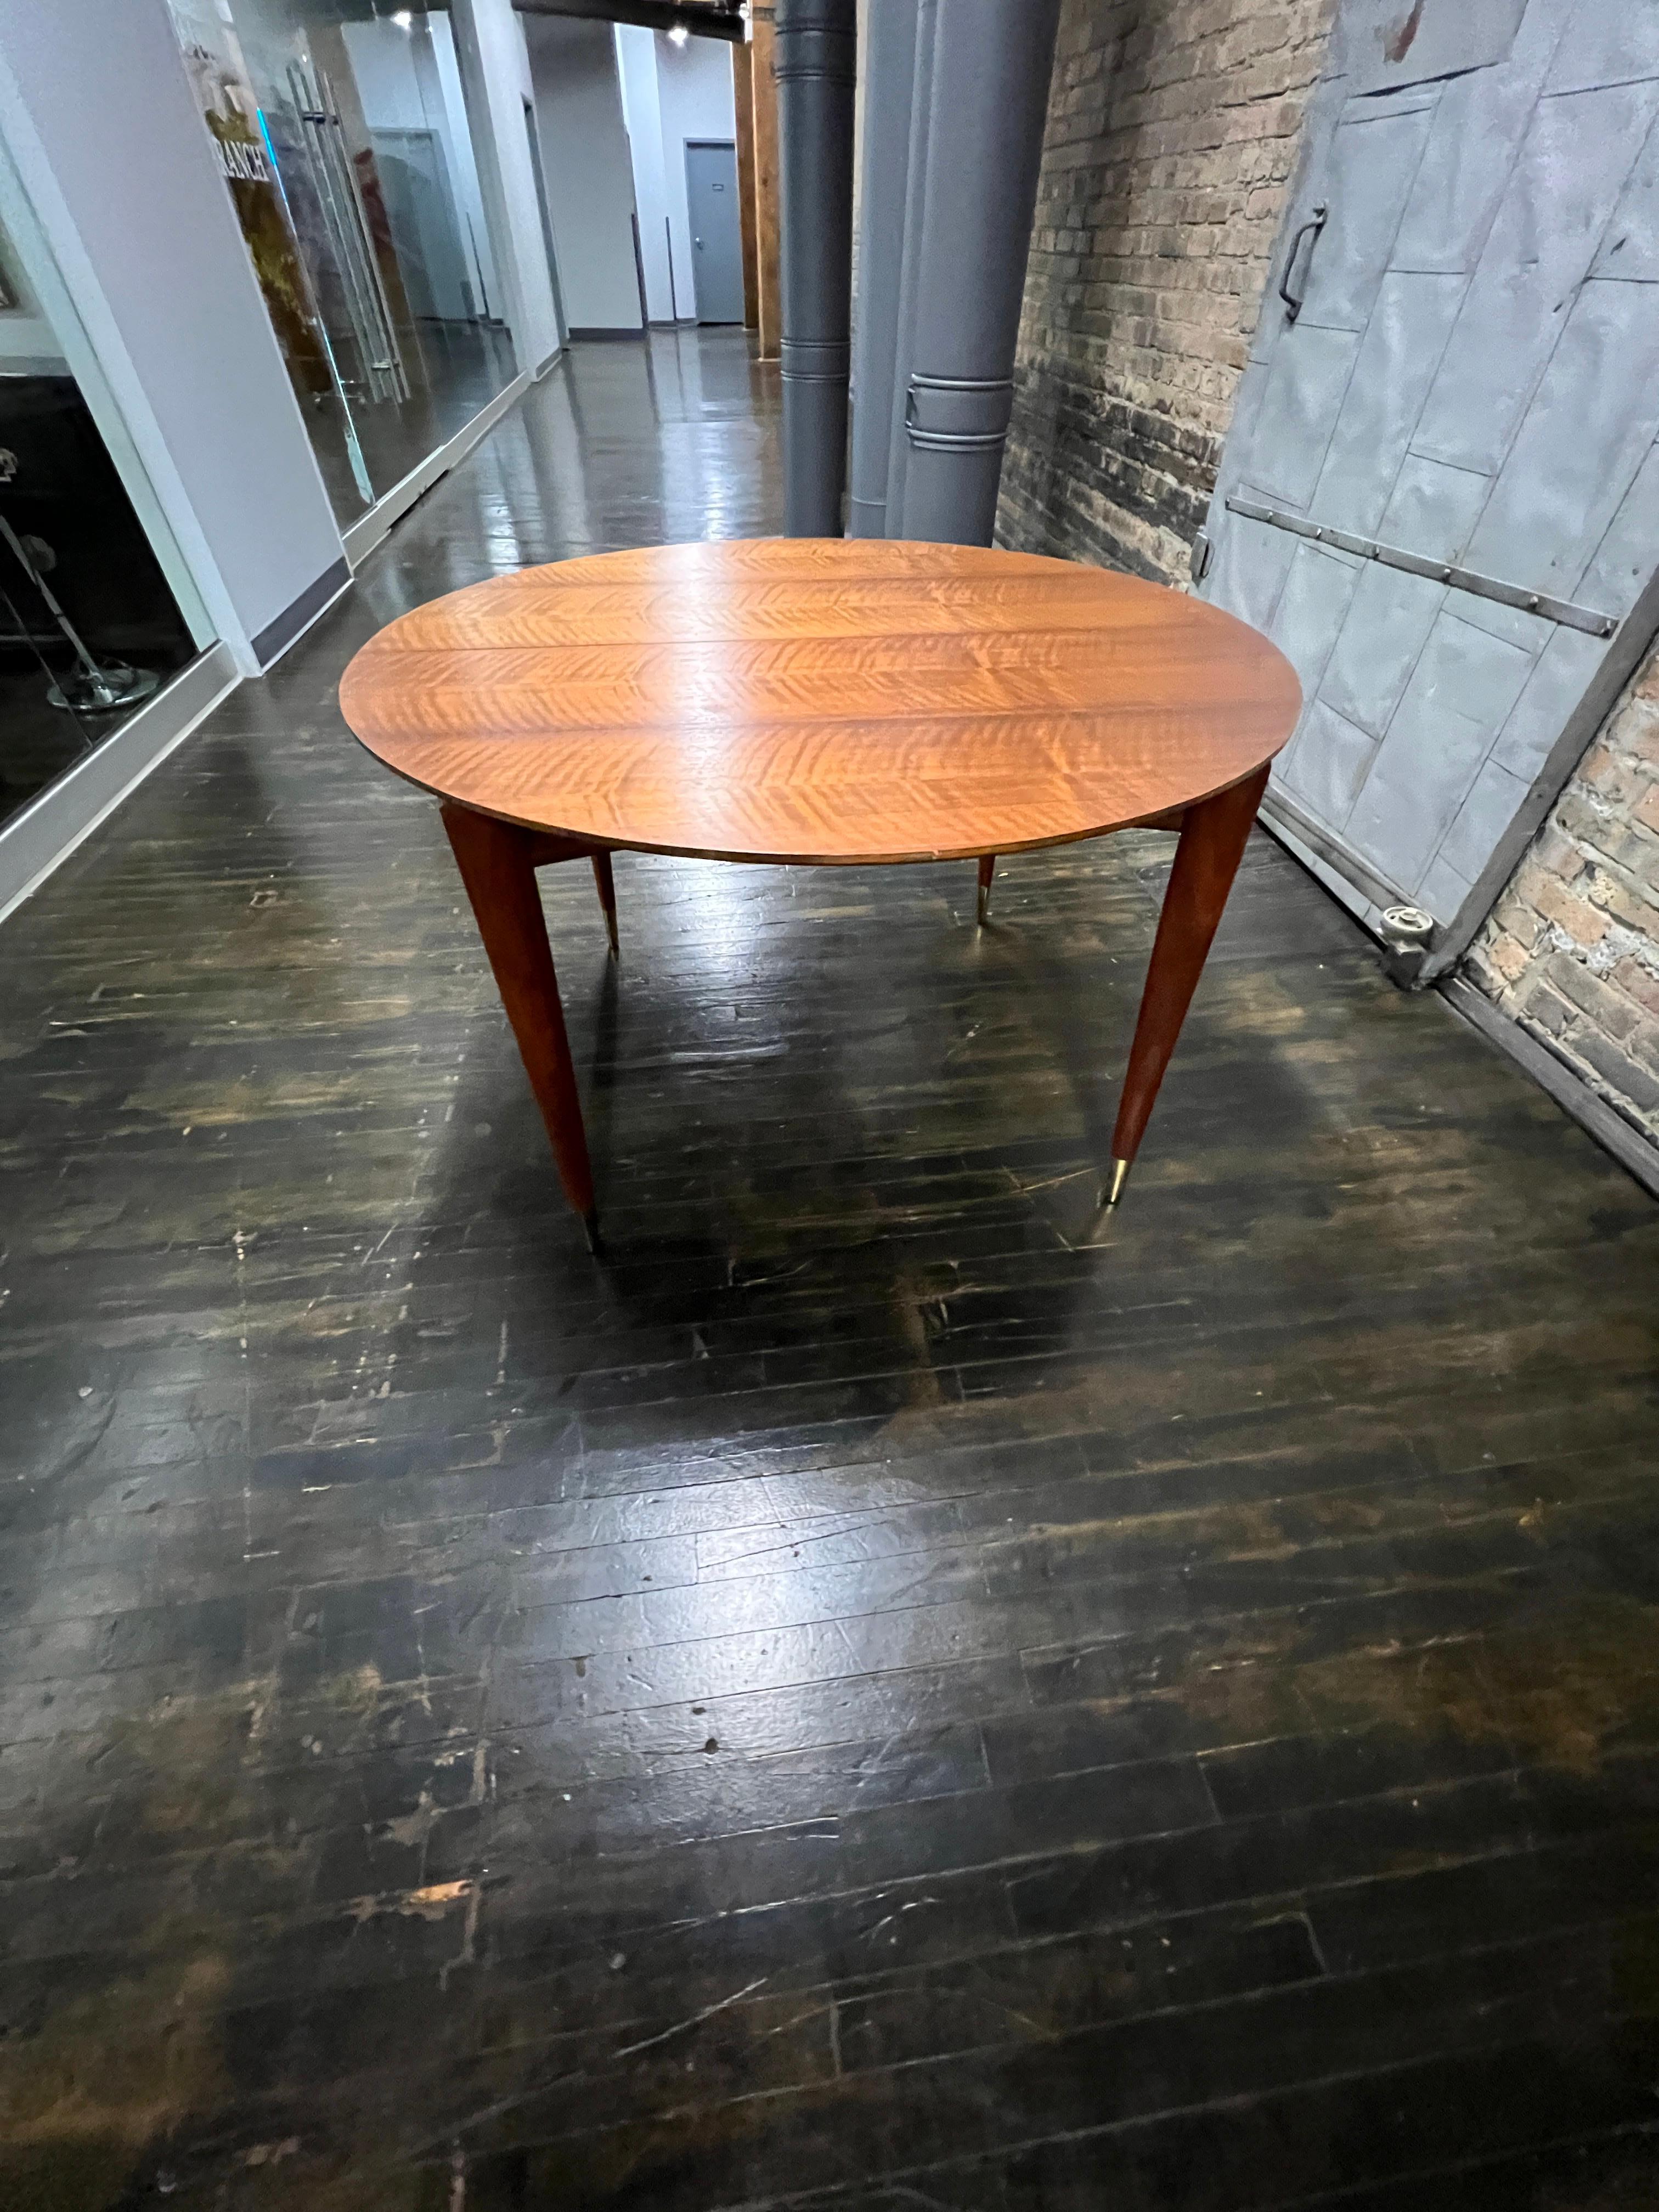 This Model 2135 extendable dining table with four leaves by Gio Ponti (for Singer & Sons) is in near perfect original condition.  It  was constructed with gorgeously veined Italian walnut (the wood is so beautiful it appears to glow and the center